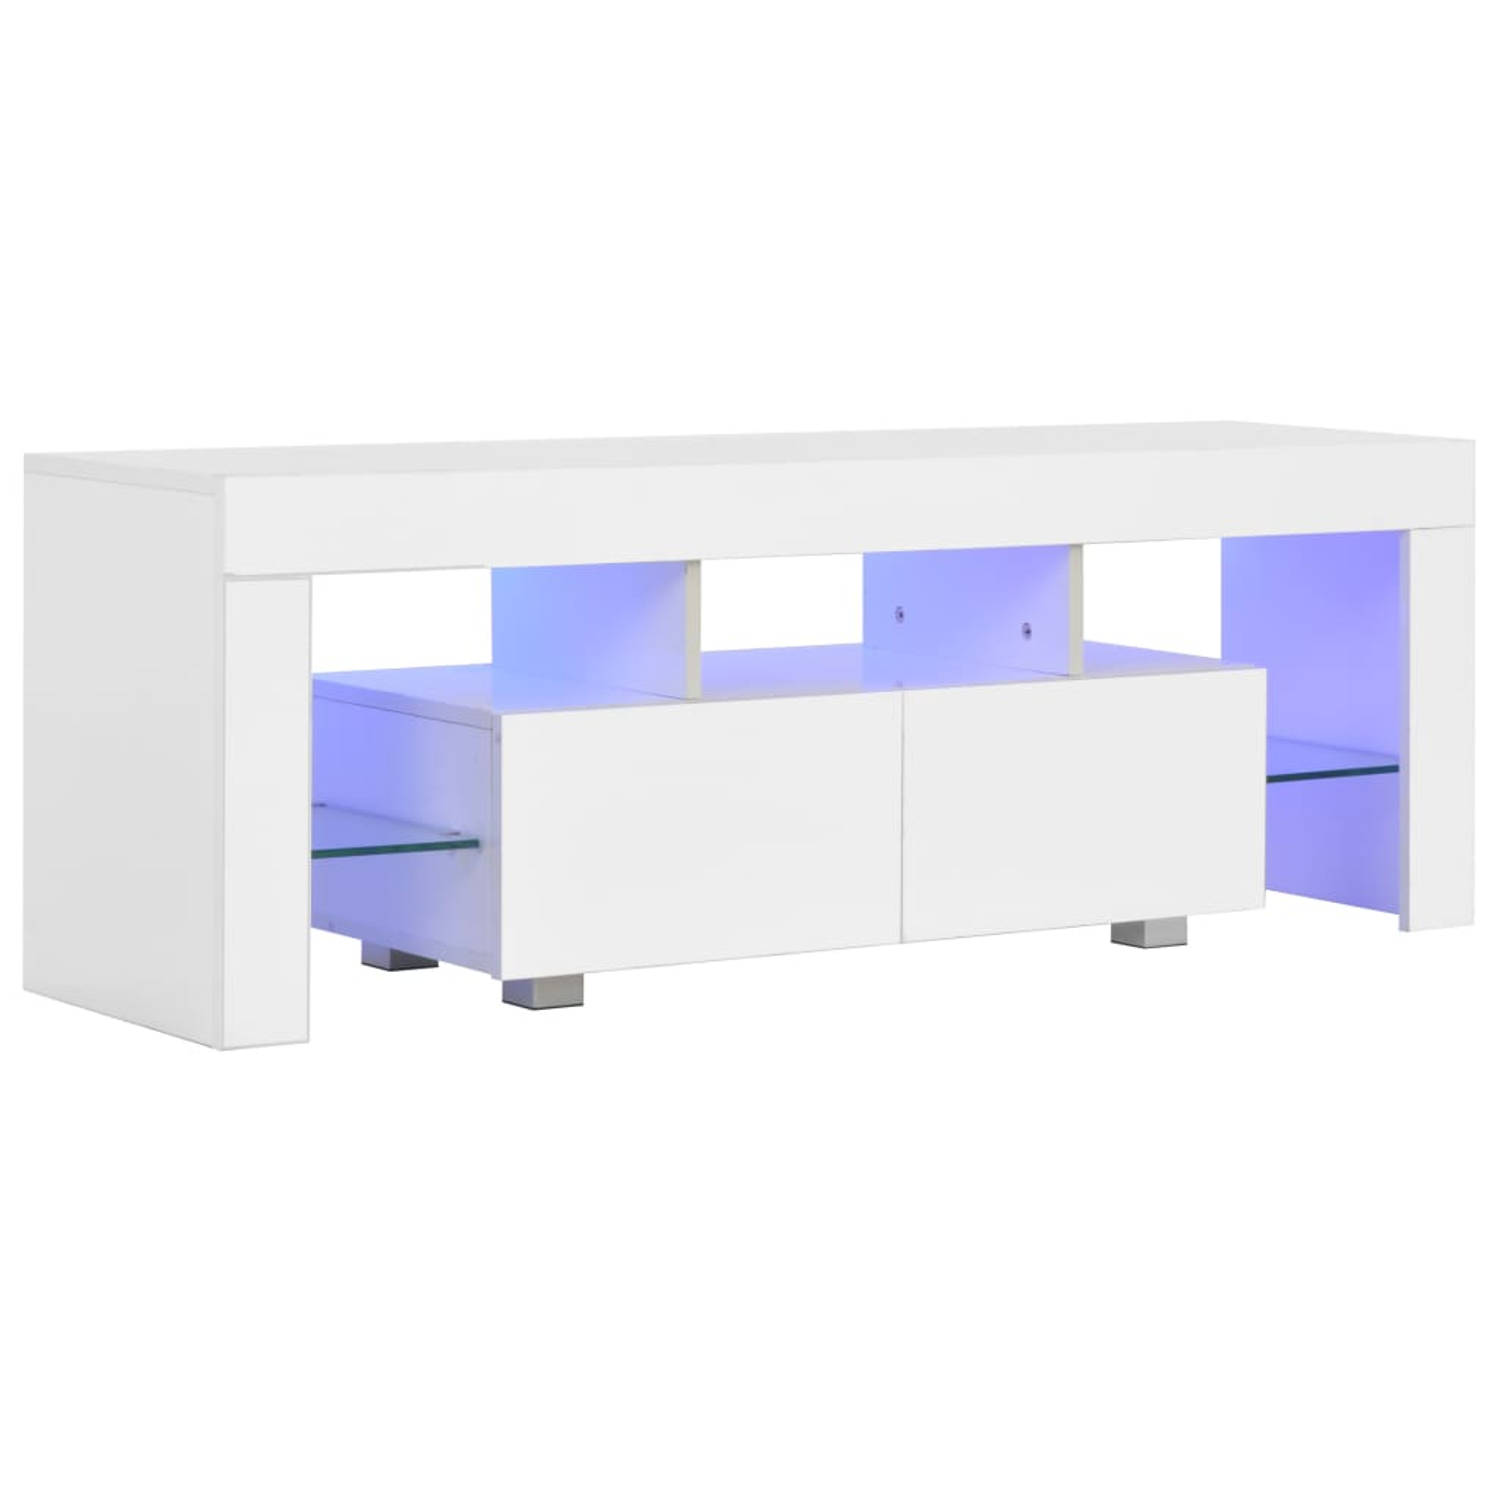 The Living Store TV-kast wit 130 x 35 x 45 cm LED-verlichting